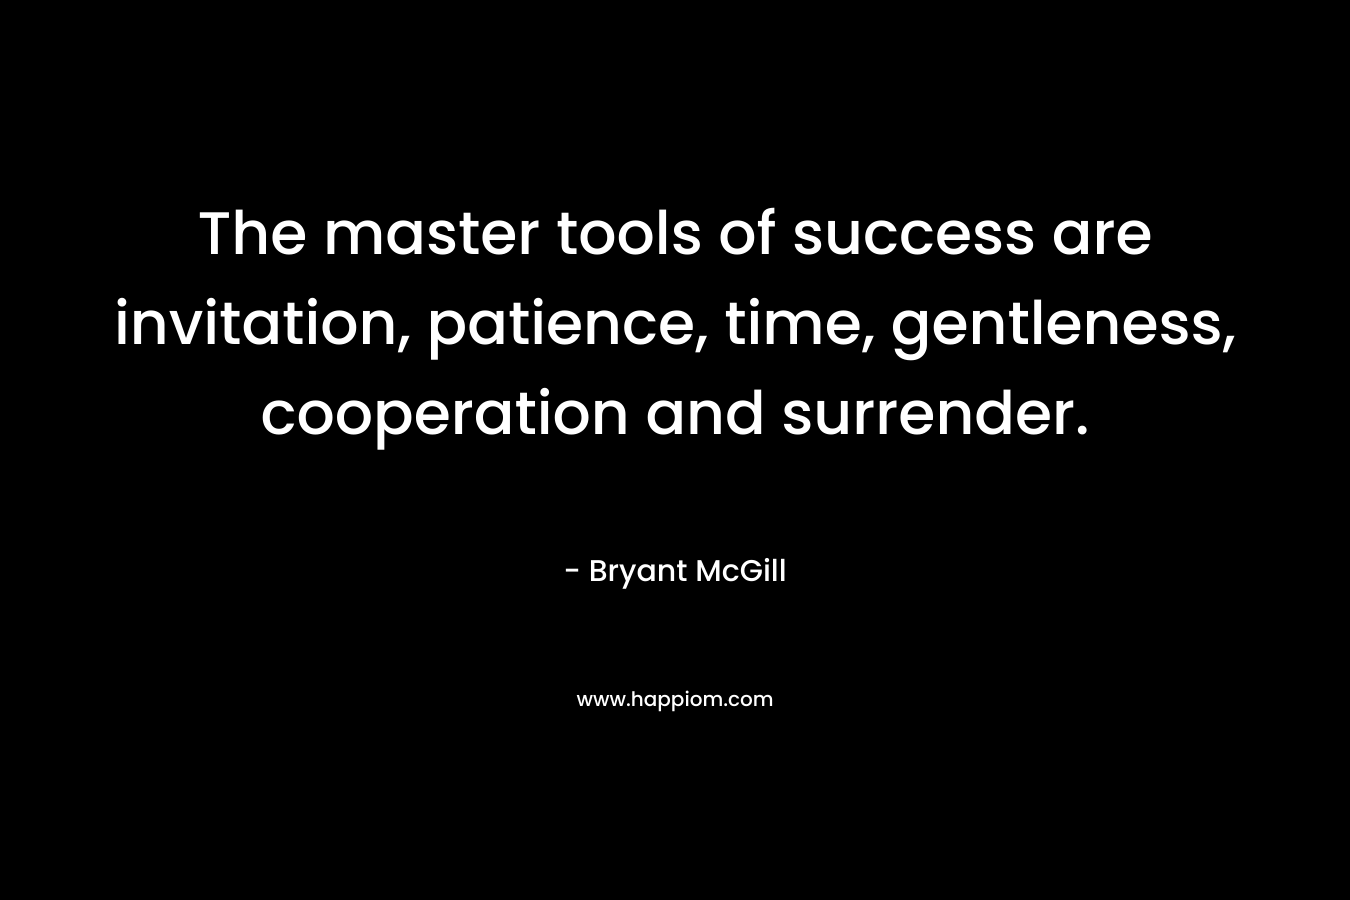 The master tools of success are invitation, patience, time, gentleness, cooperation and surrender. – Bryant McGill